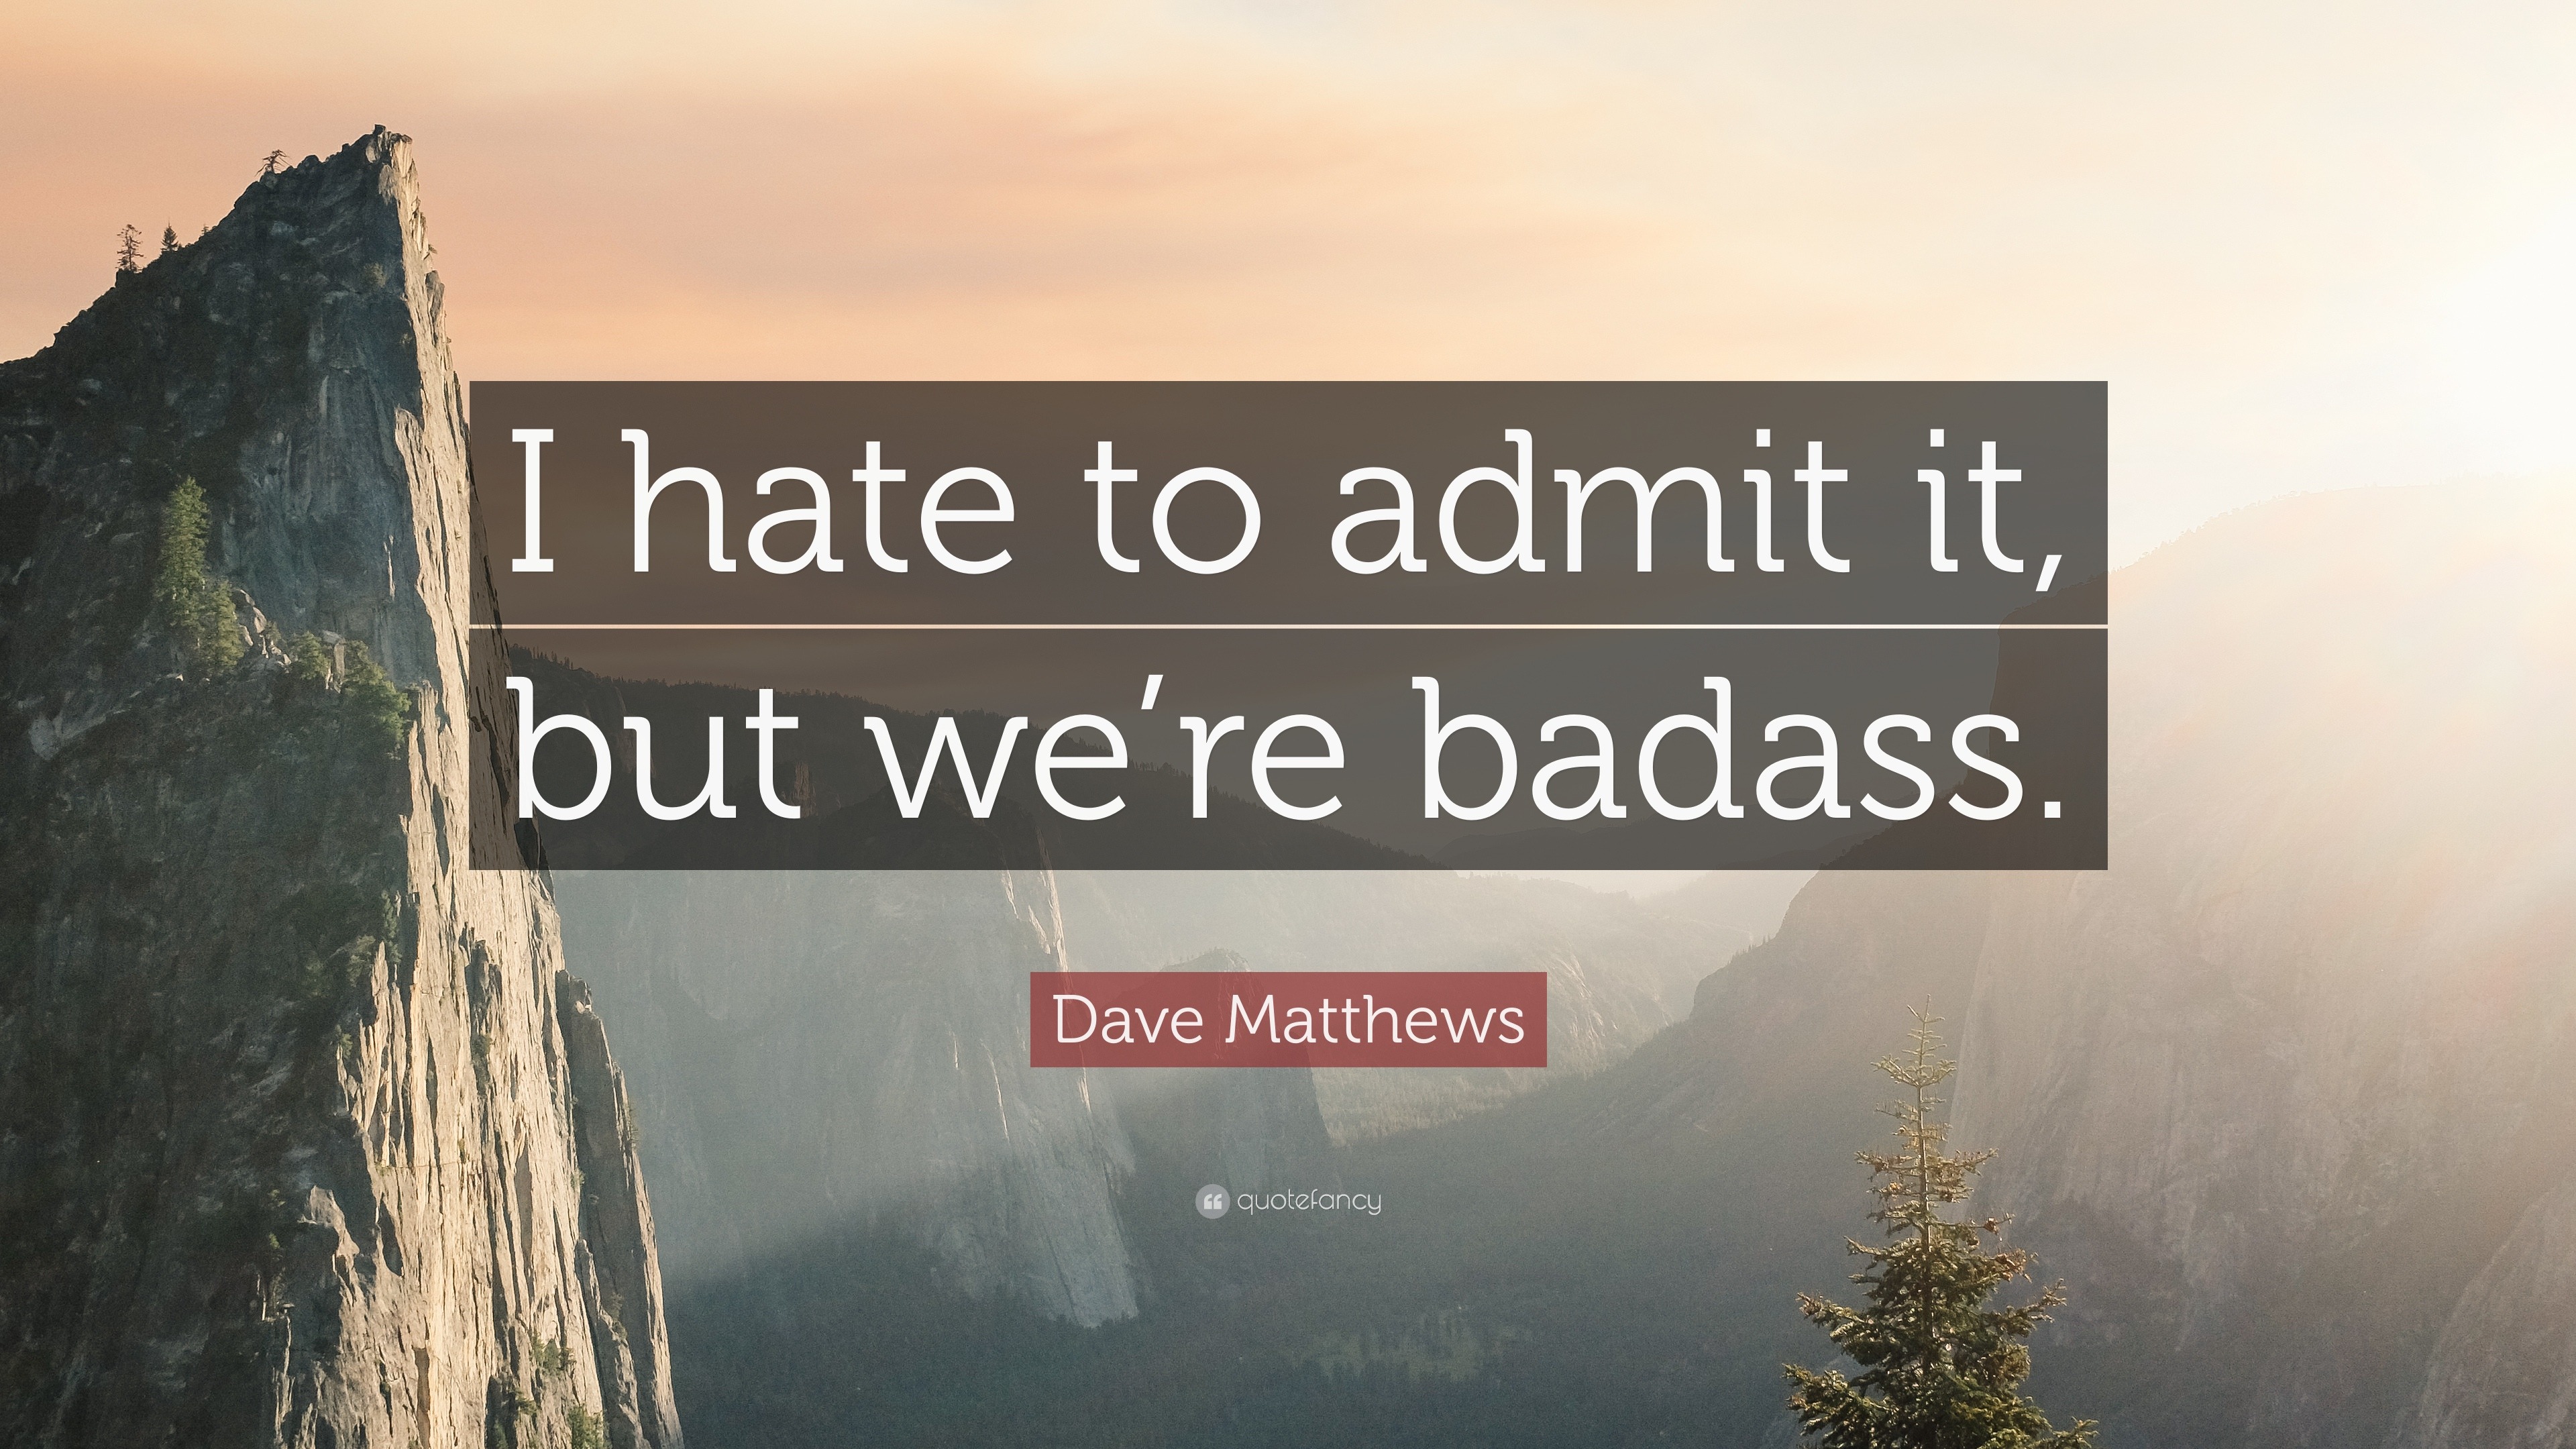 Dave Matthews Quote: "I hate to admit it, but we're badass." (12 wallpapers) - Quotefancy